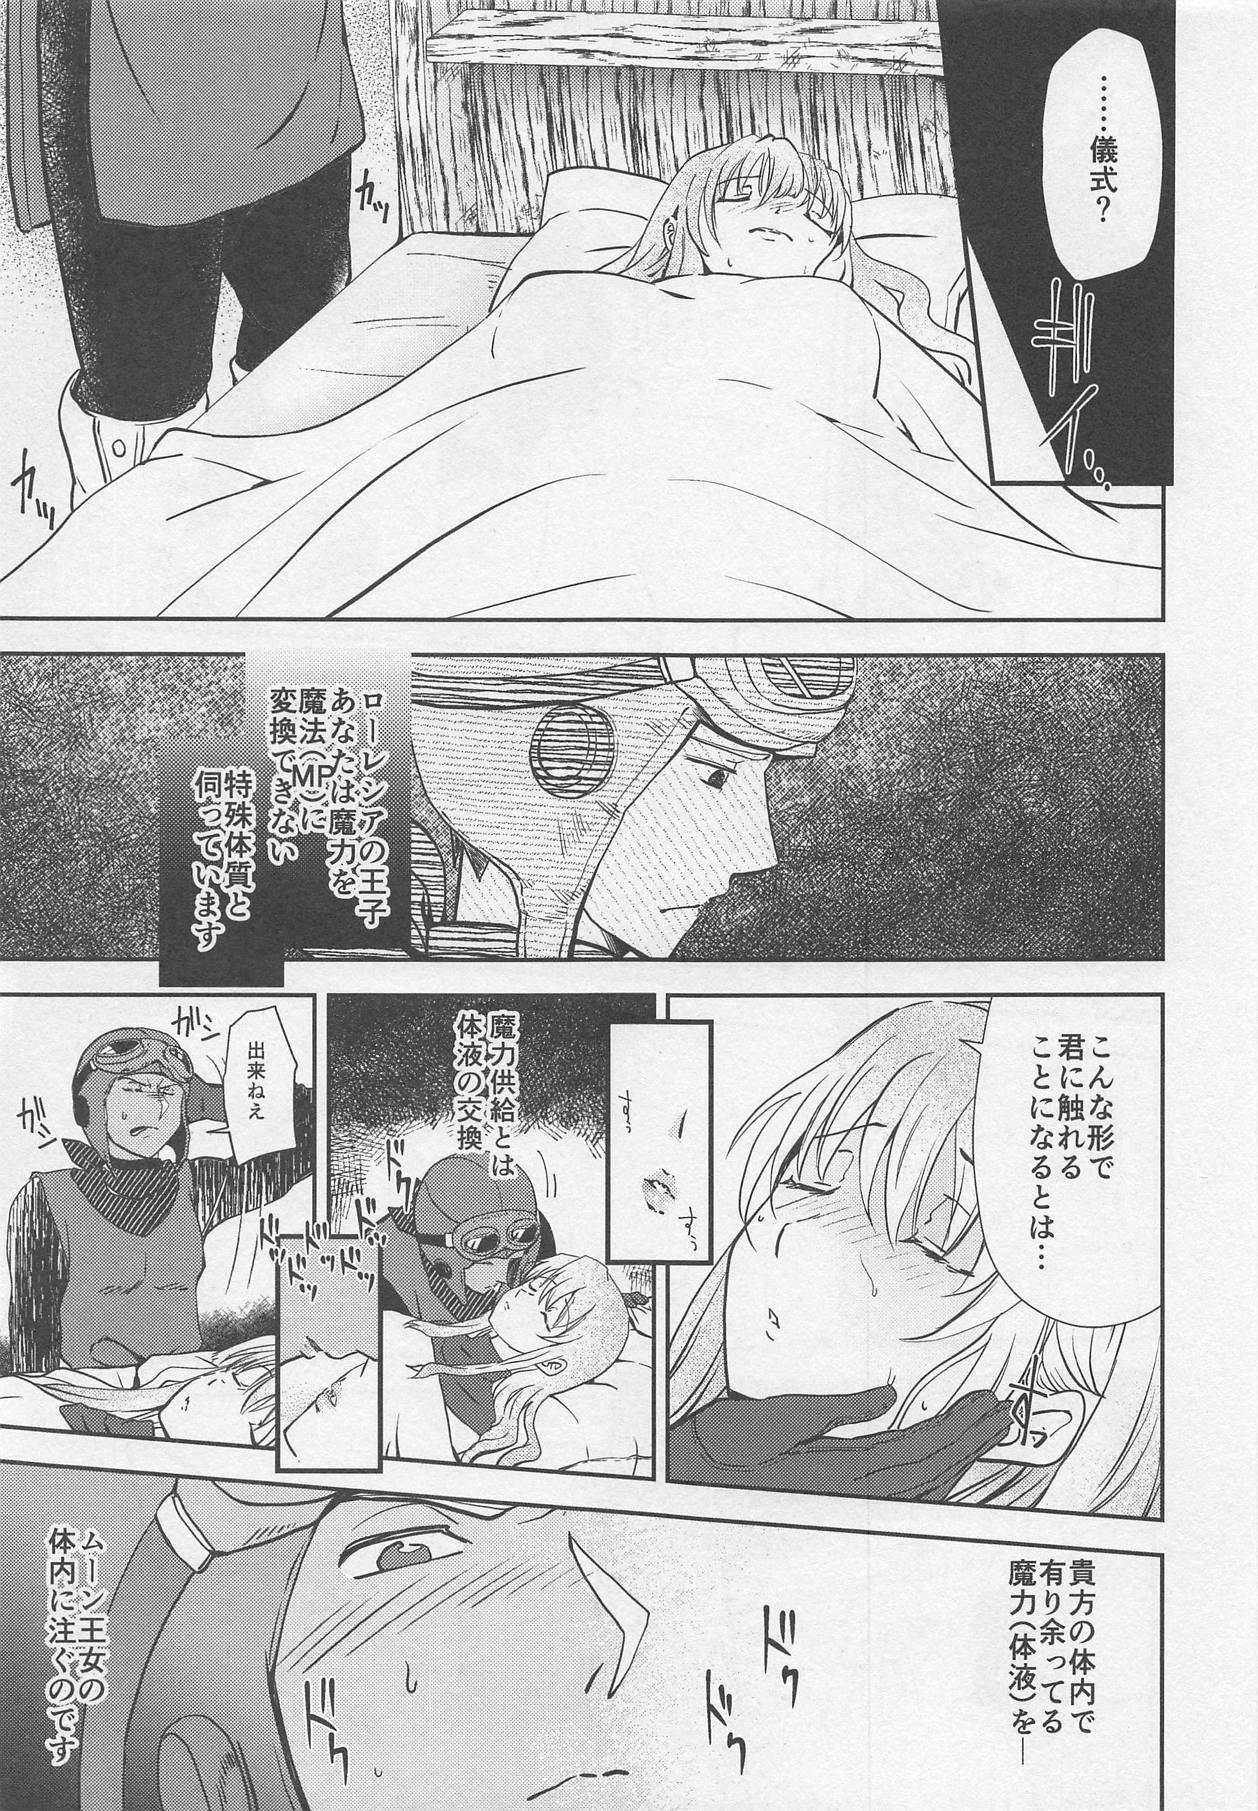 Best Blowjobs Ever Moonbrooke Oujo to Maryoku Kyoukyuu - Dragon quest ii Free Rough Porn - Page 6